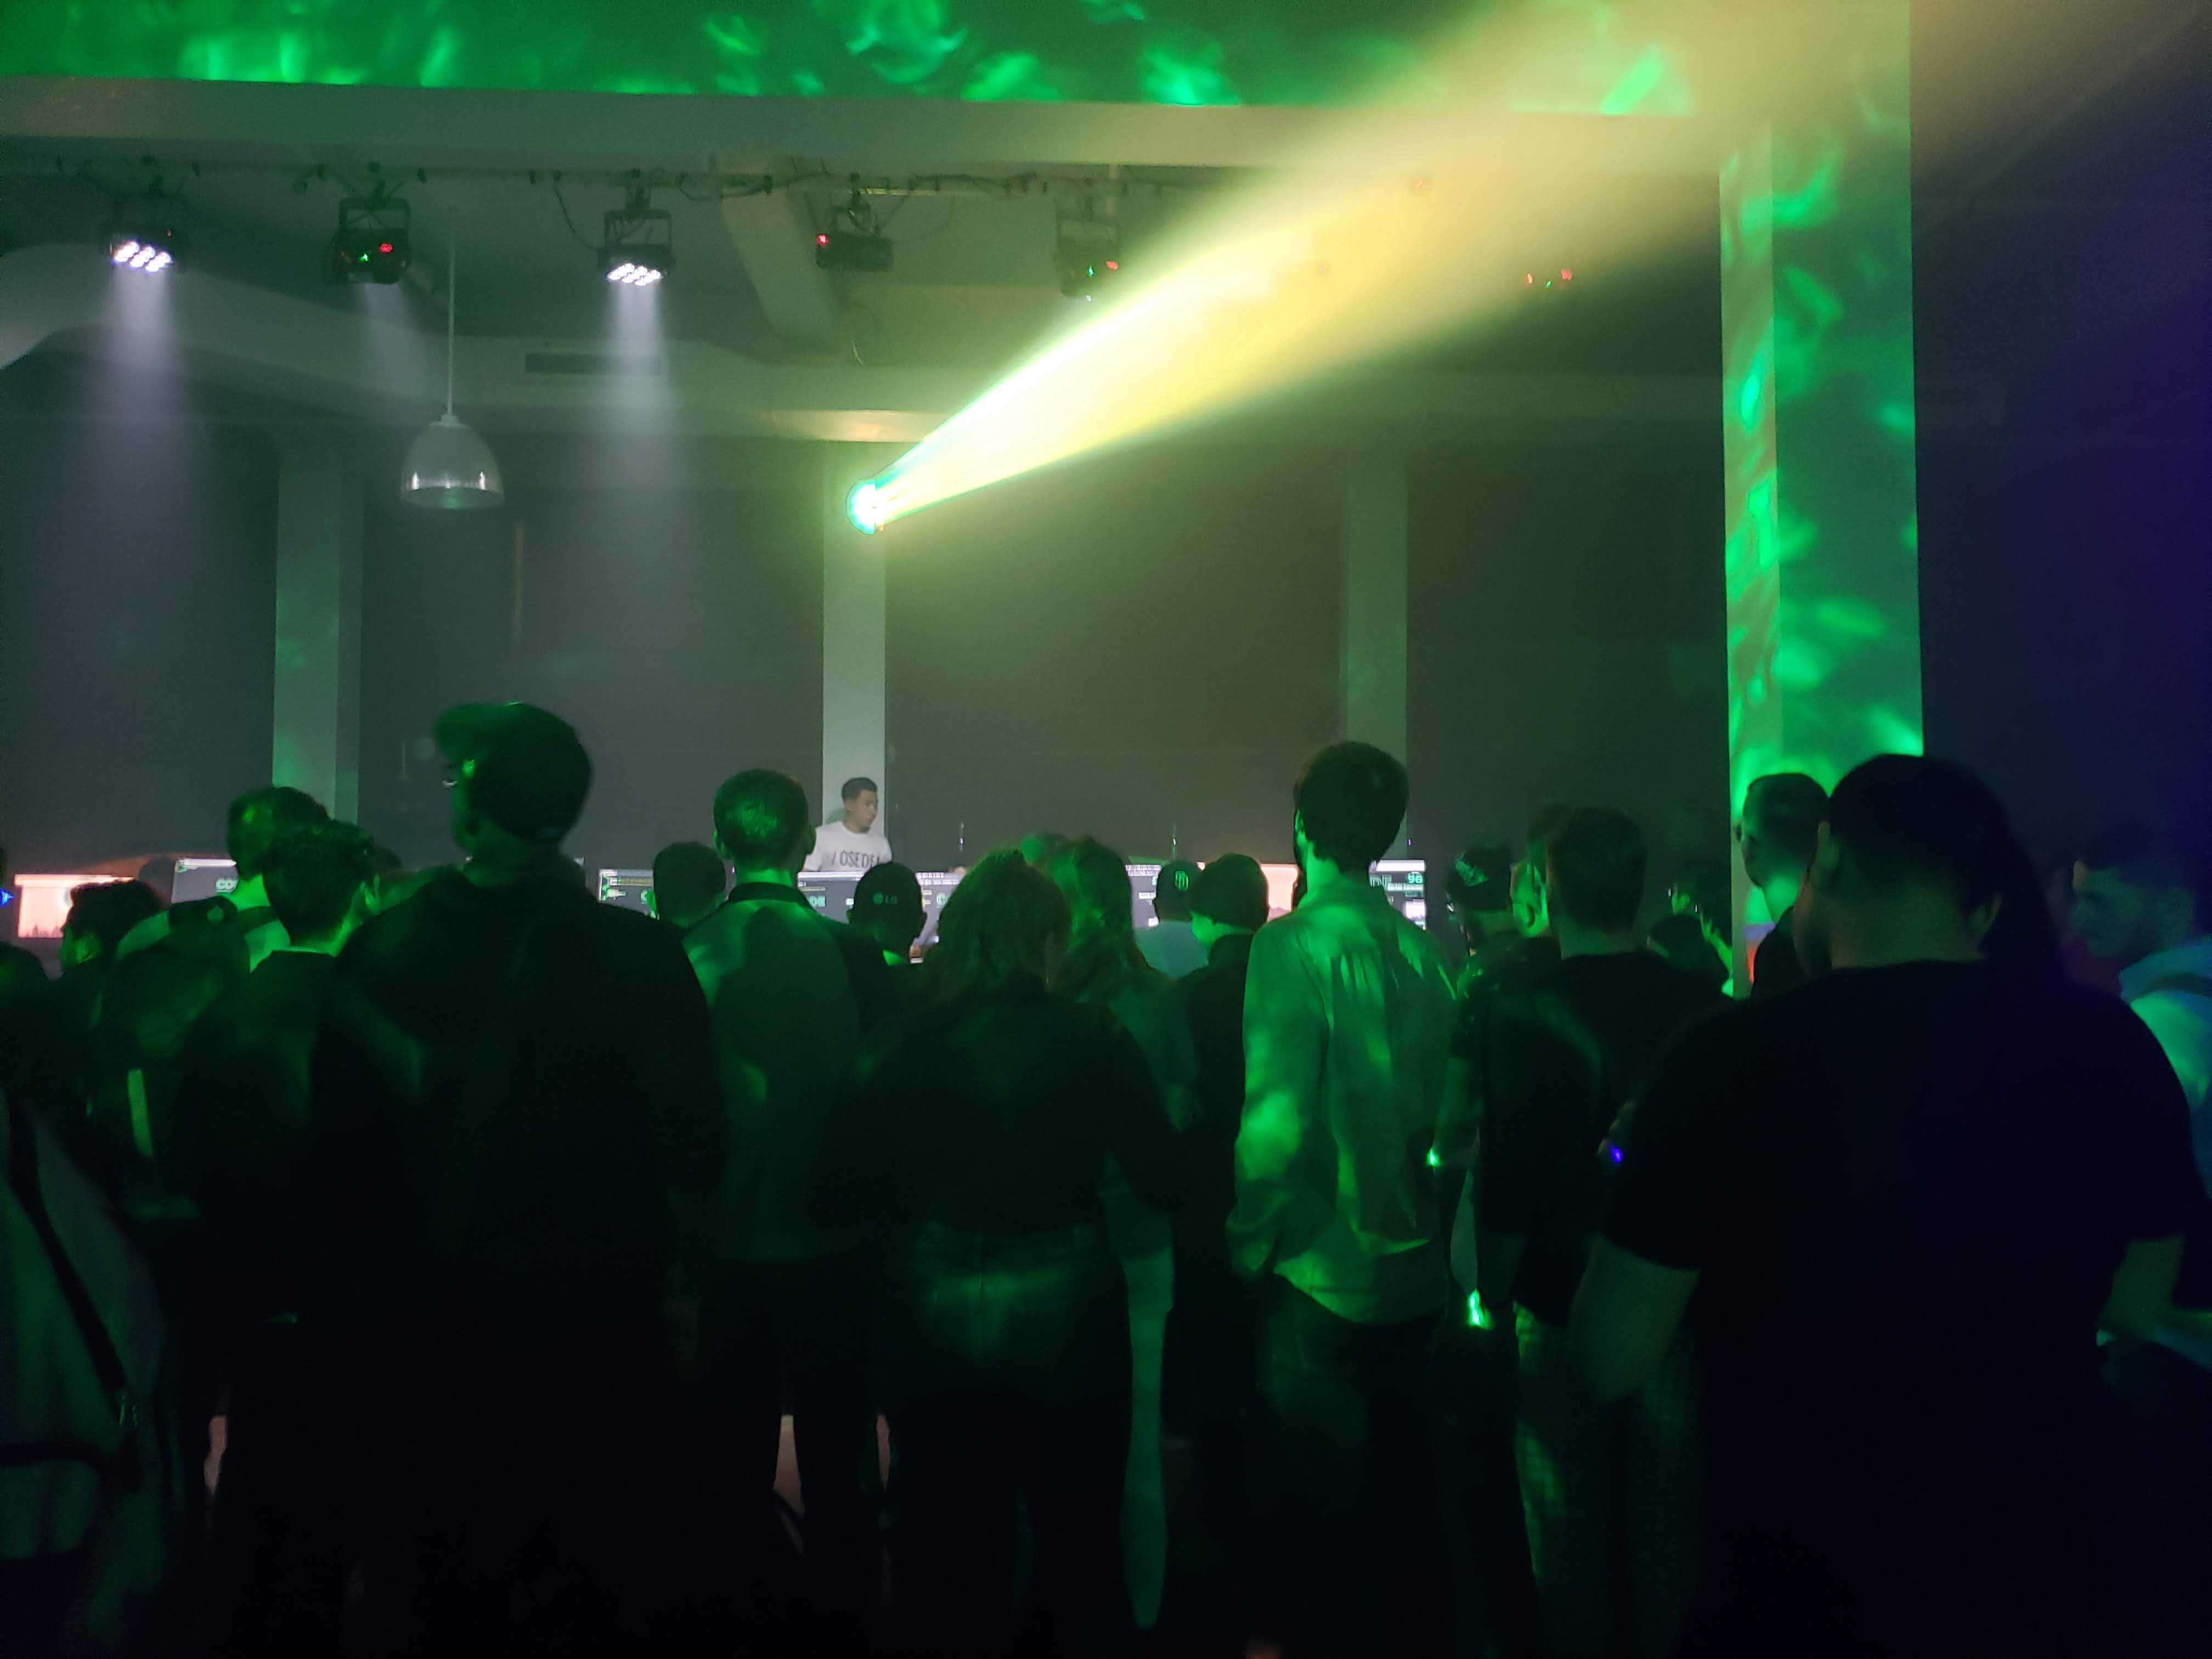 Crowd in a dark nightclub-like environment at Code in the Dark Montreal 2019.